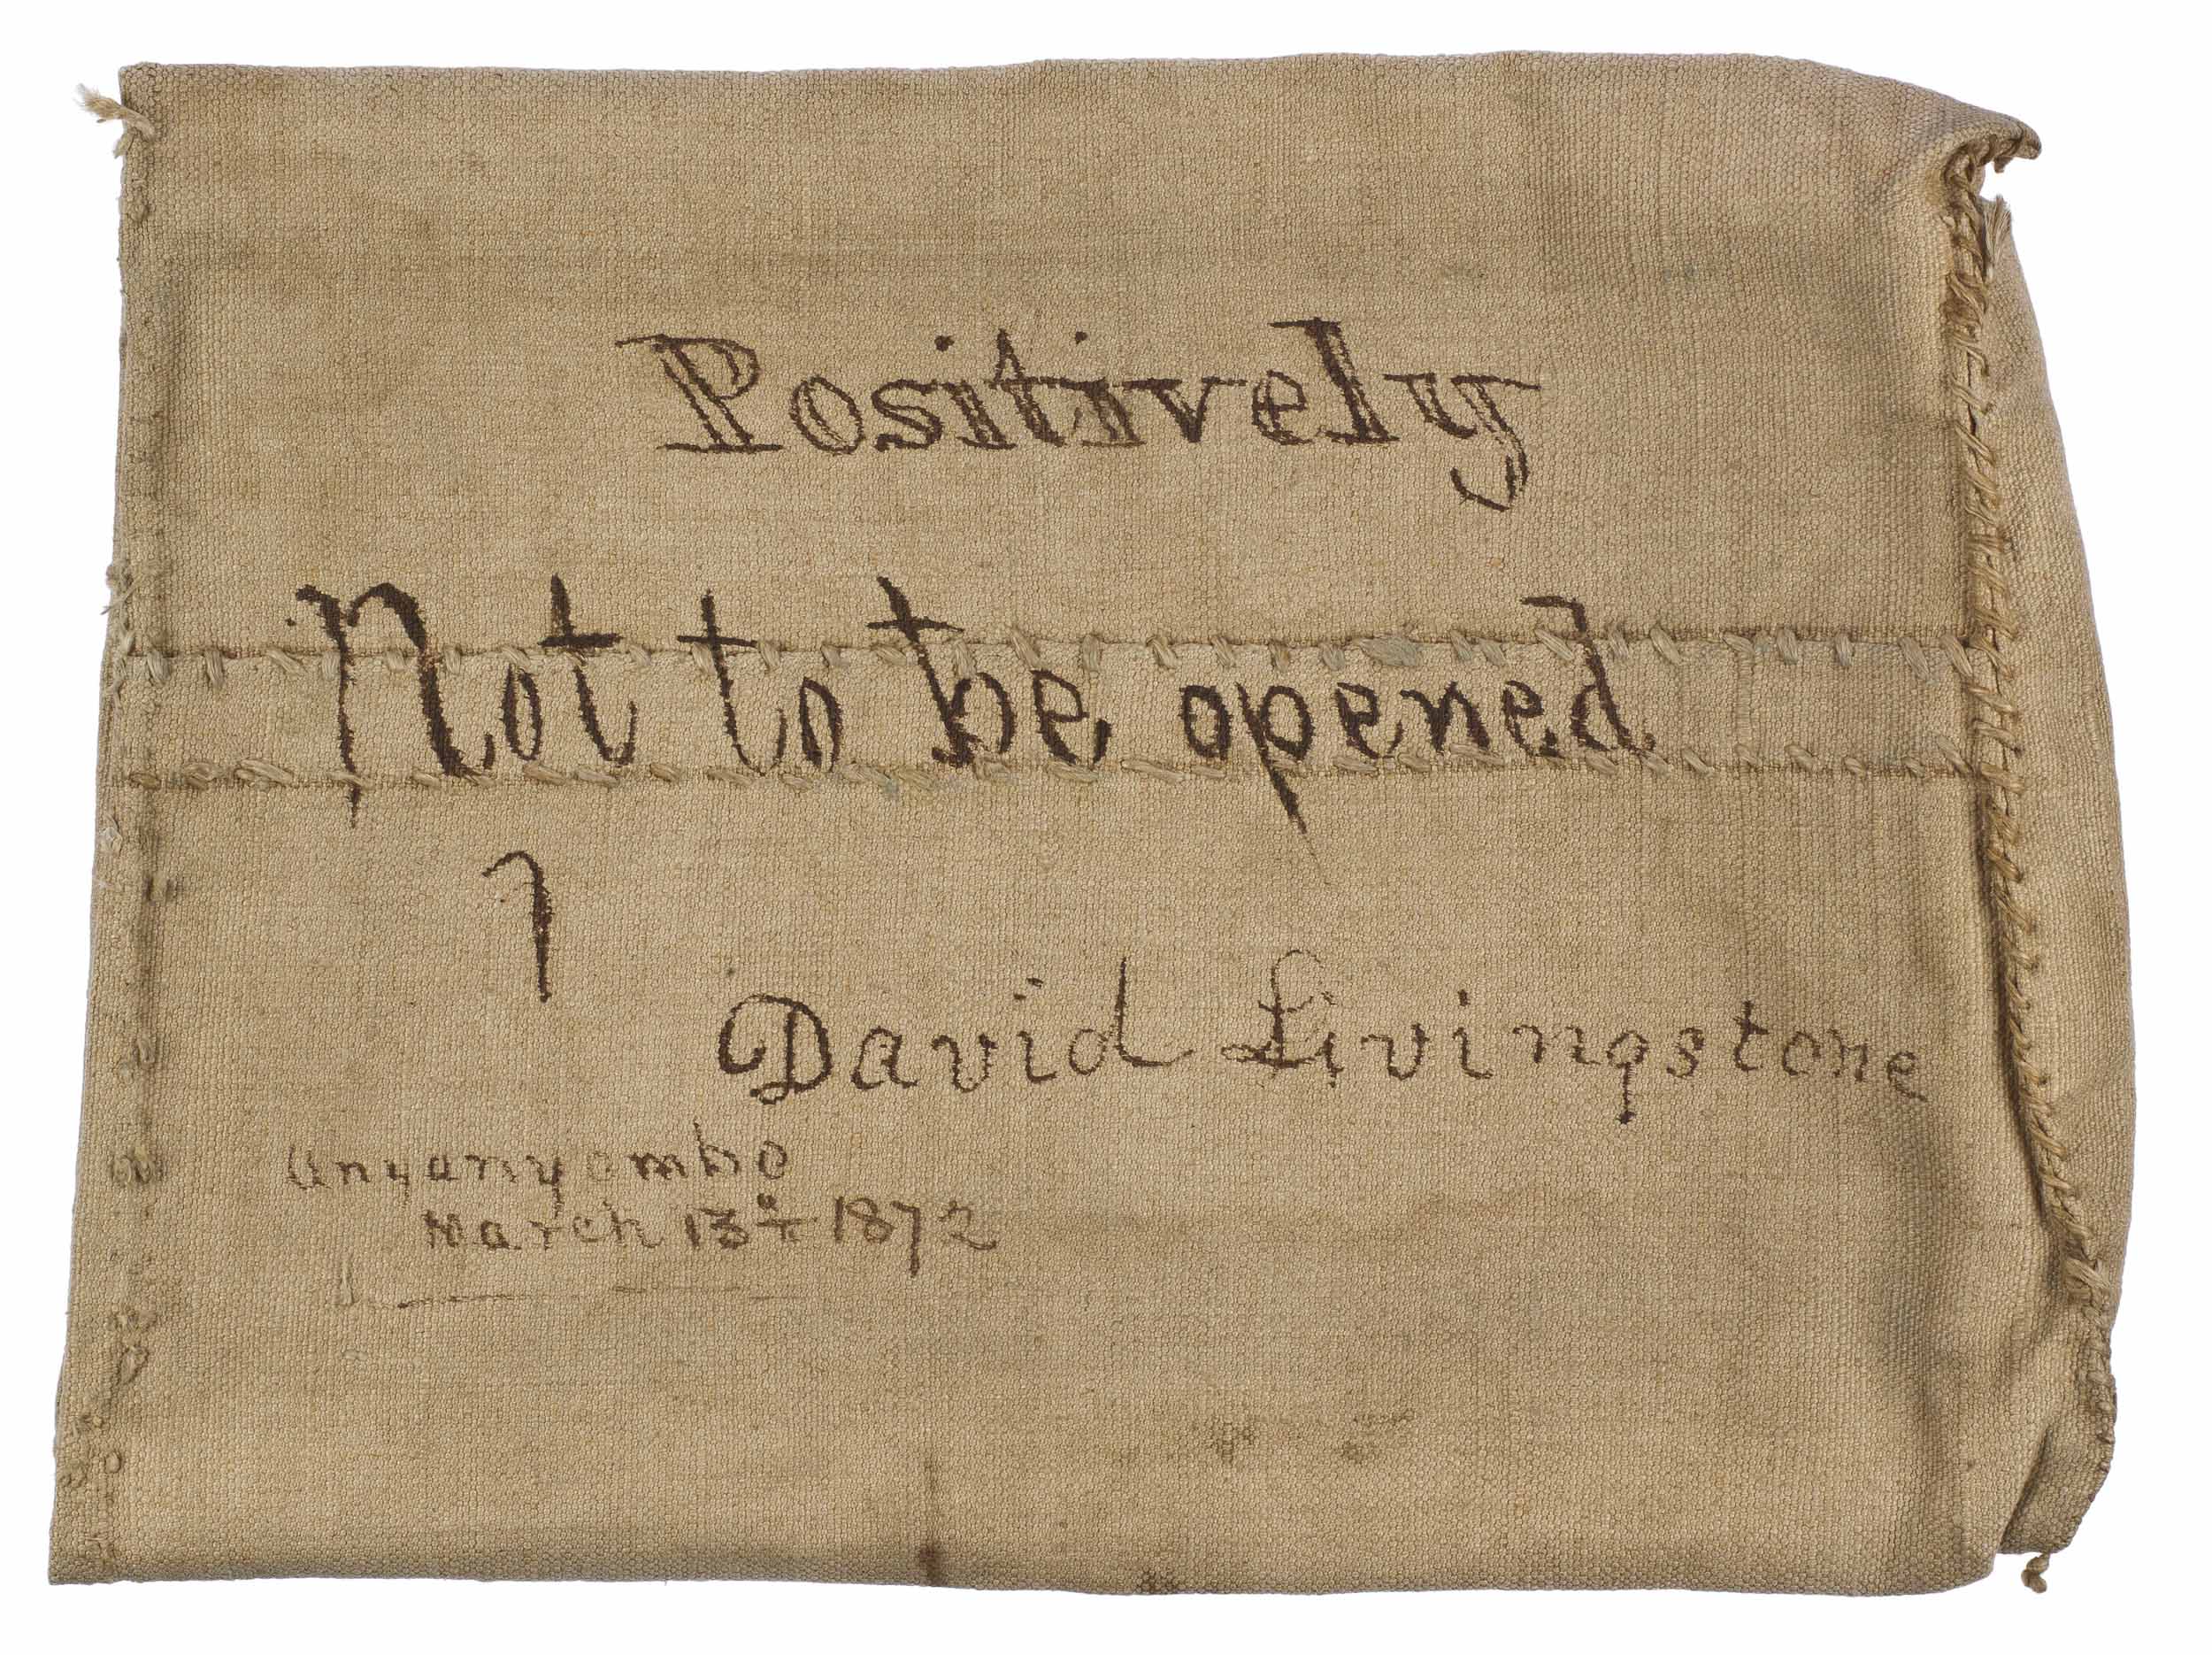 Livingstone's mail bag, given to H.M. Stanley, c.1872. Copyright David Livingstone Centre (National Museums of Scotland, photographer). May not be reproduced without the express written consent of the National Trust for Scotland, on behalf of the Scottish National Memorial to David Livingstone Trust (David Livingstone Centre).